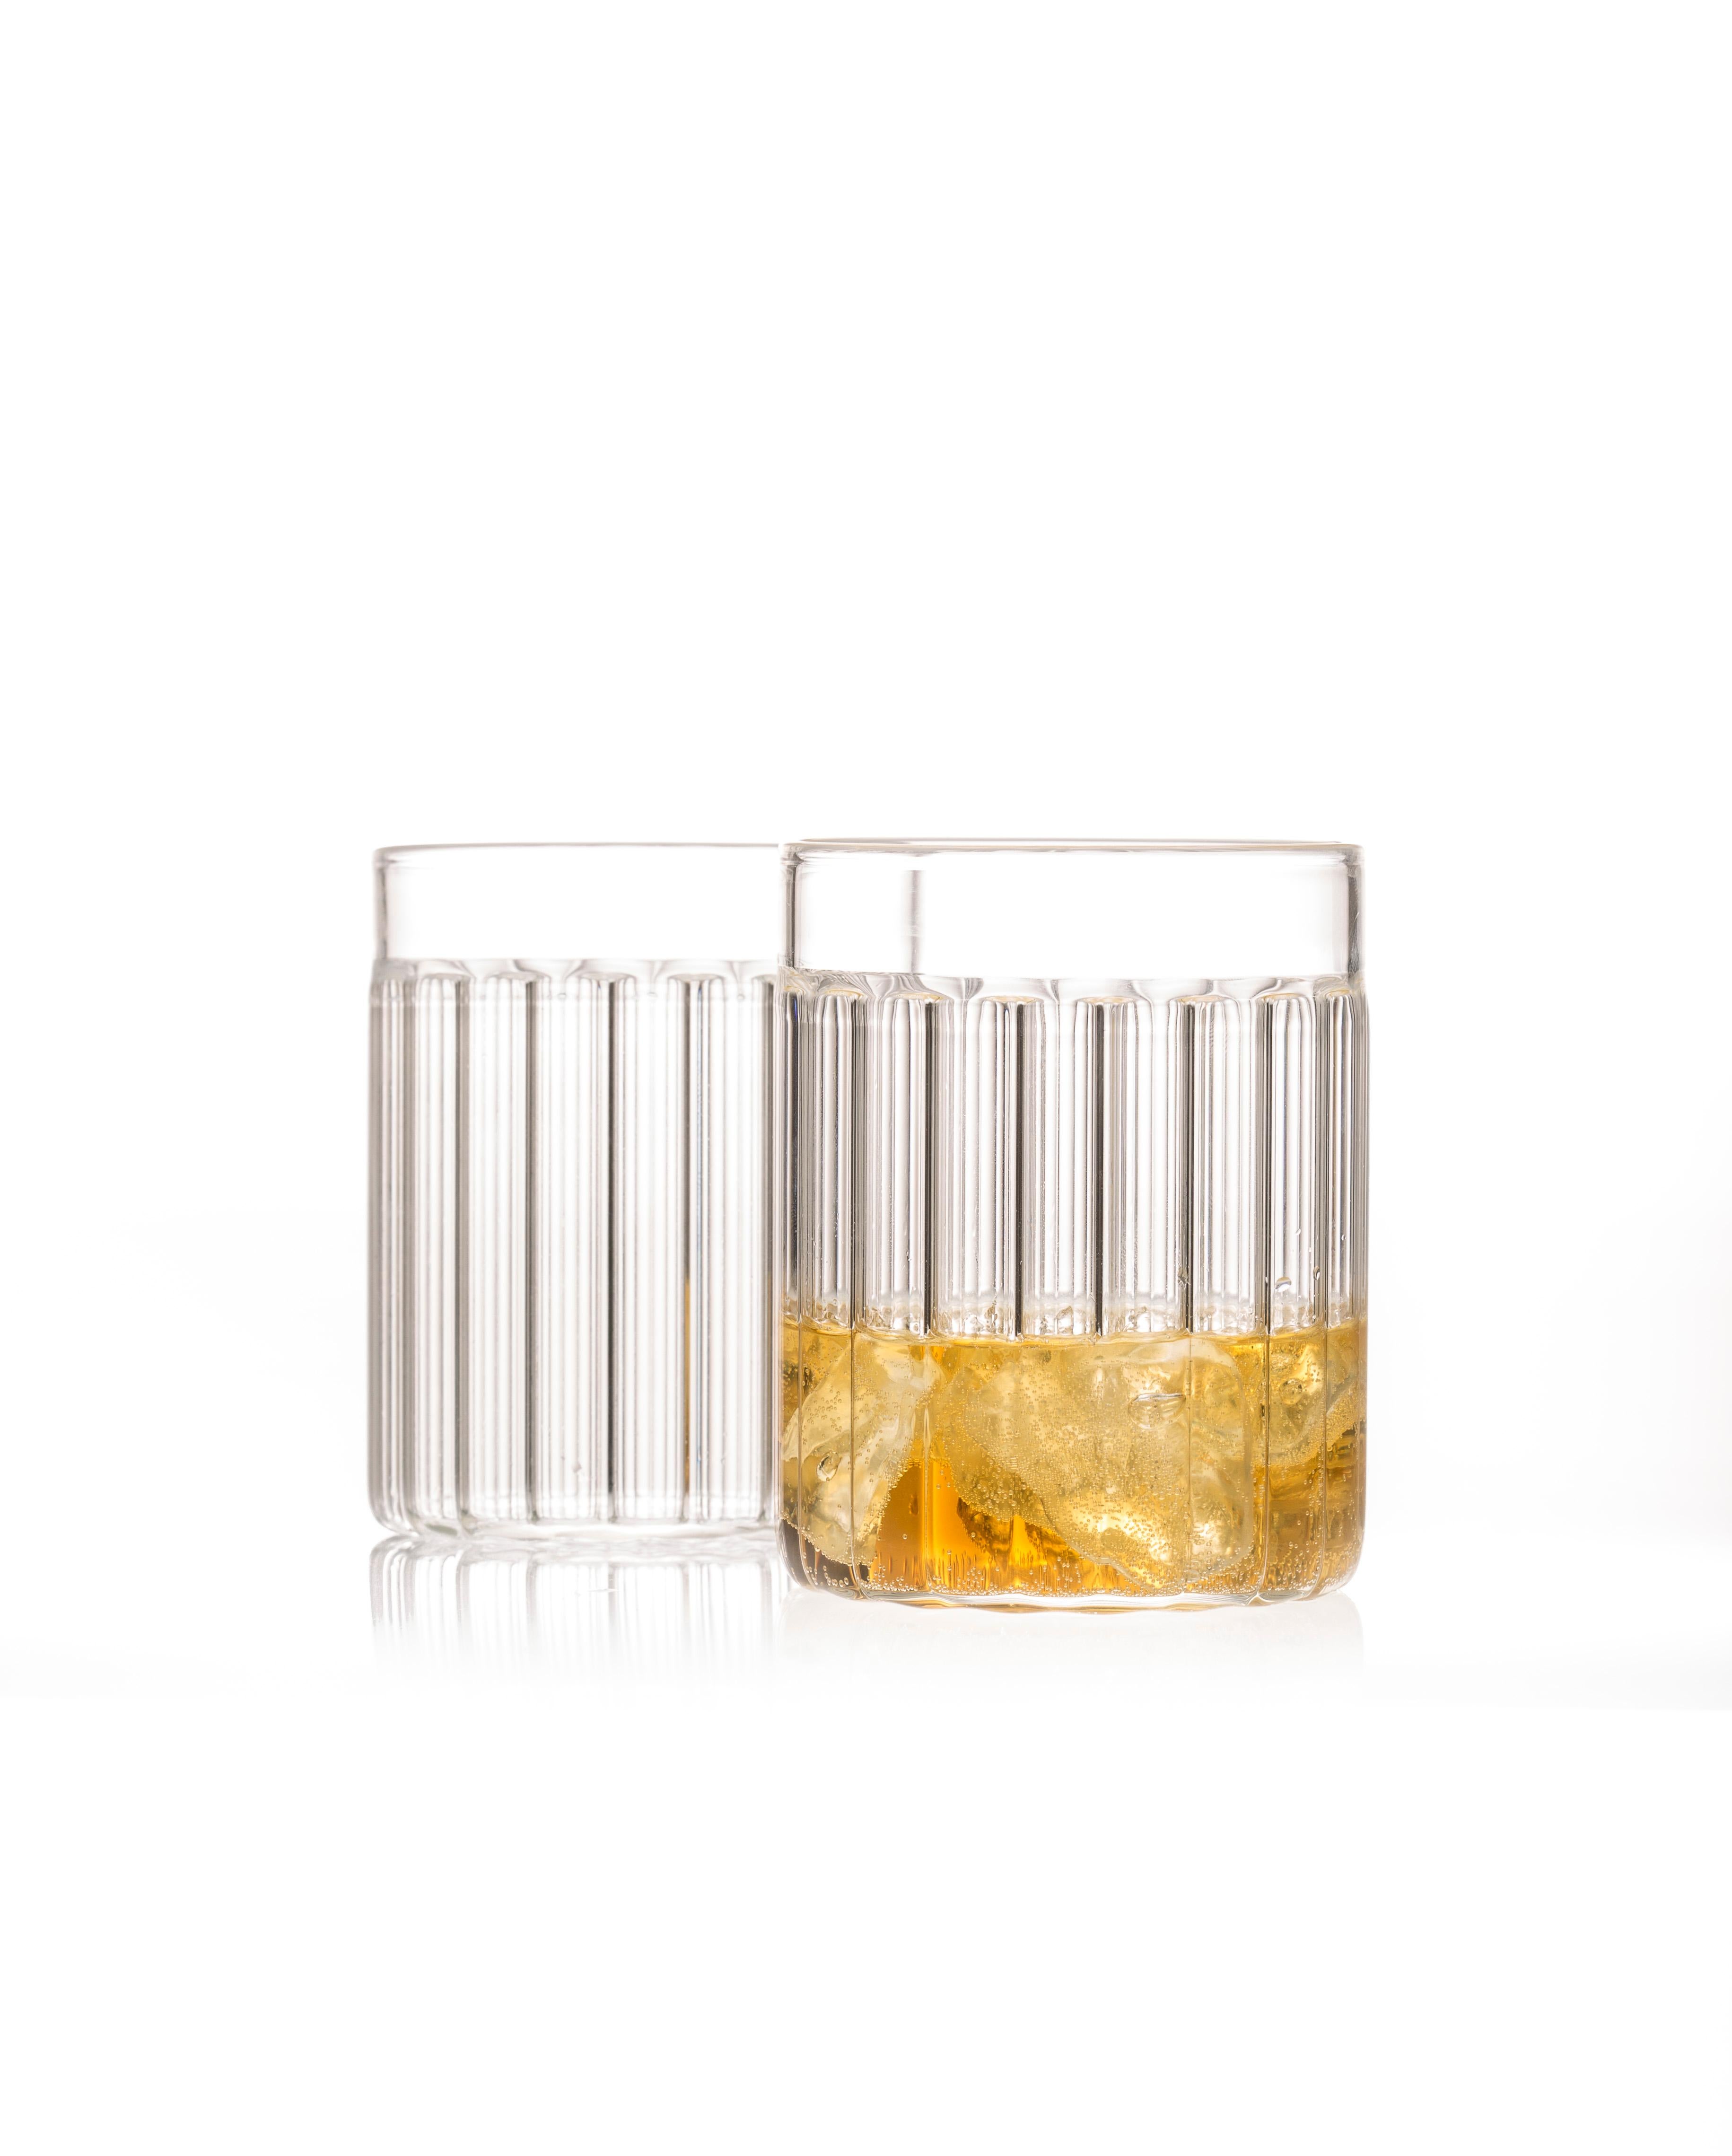 The Bessho Collection is inspired by a trip to the healing hot springs of an onsen in Bessho, Japan, the Bessho Collection is an exploration by Ferrone that challenges handcraft techniques by creating a ribbon of smooth glass around the rim,